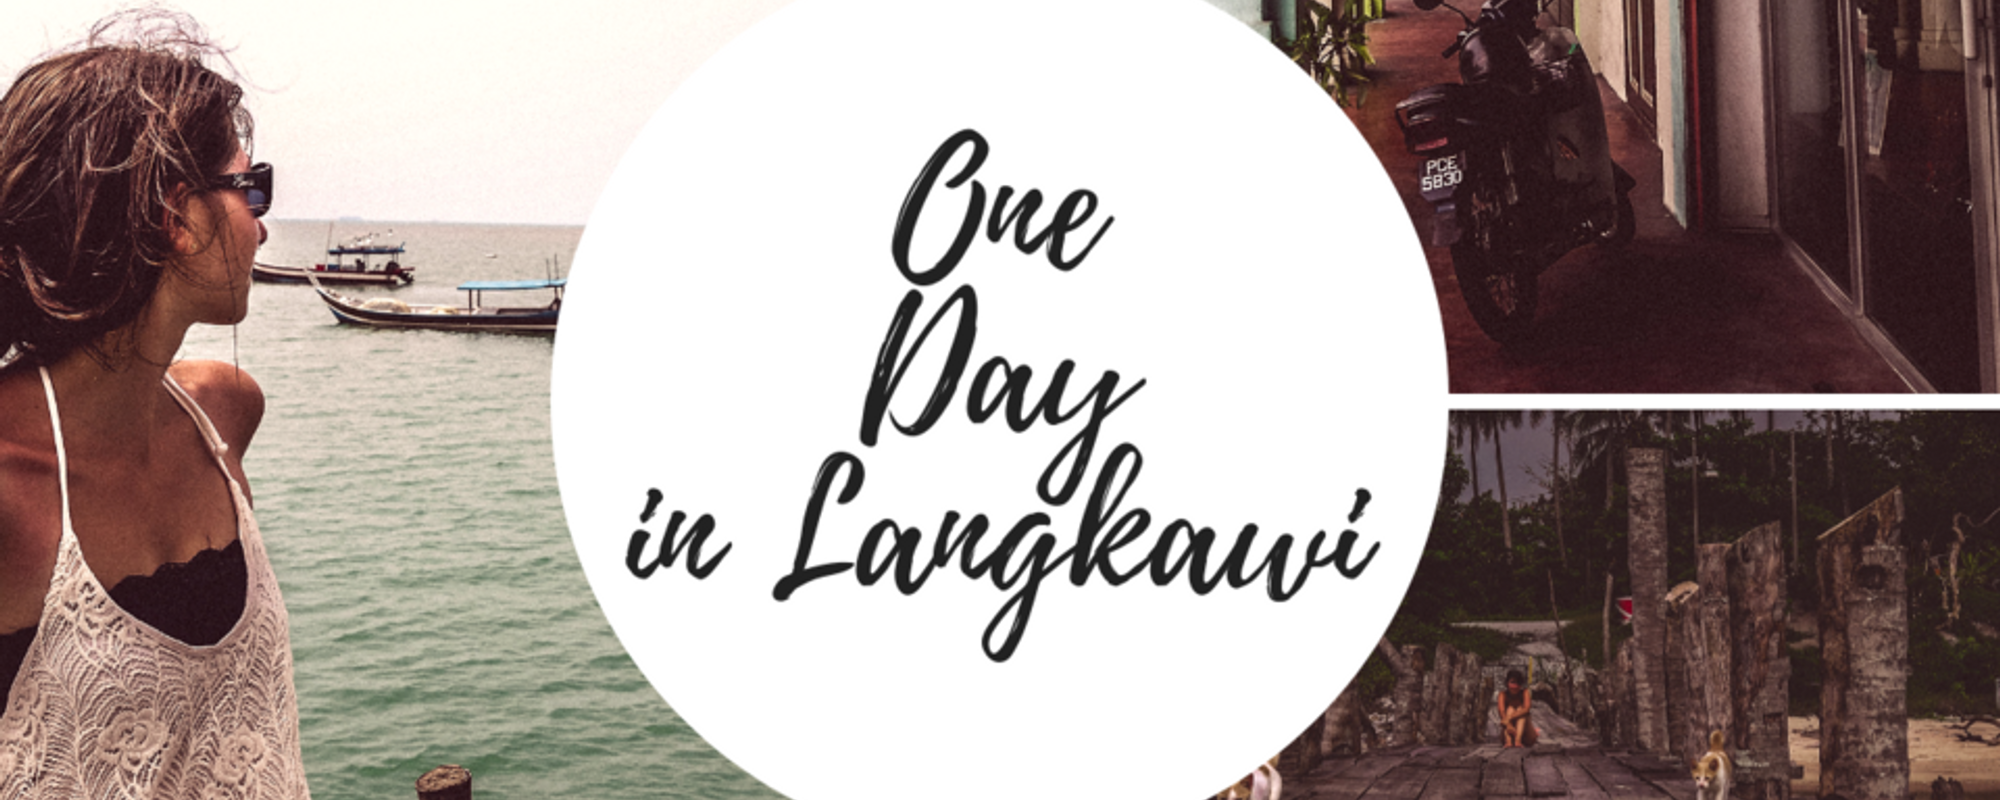 One day in Langkawi